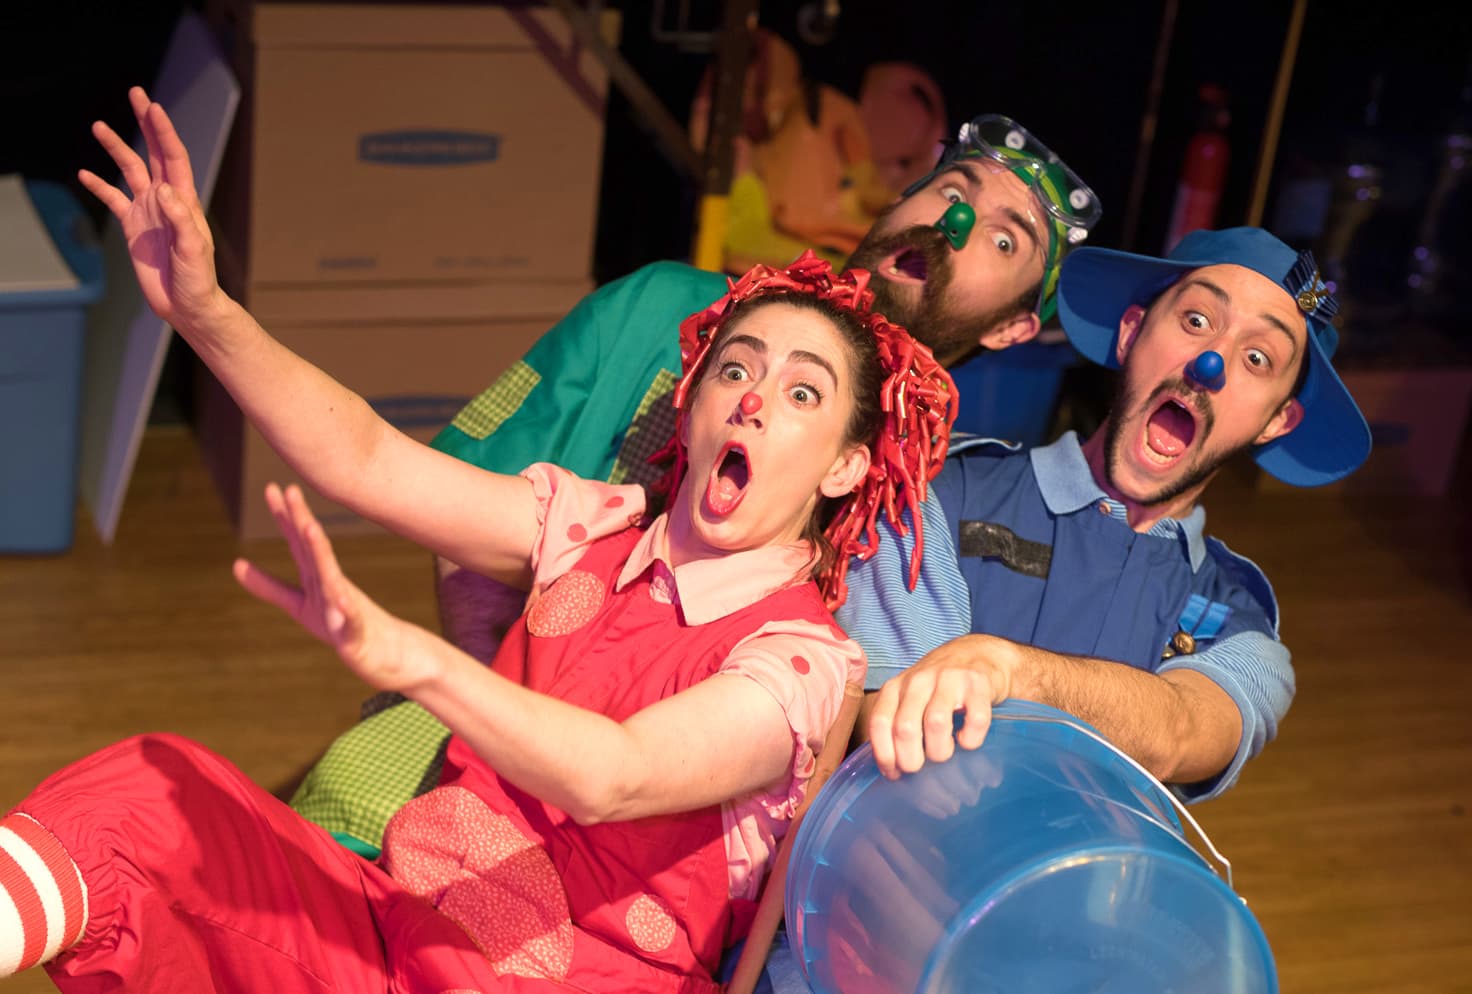 Rebecca Lehrhoff as Ruffles, Glen Moore as Poodge and Jesse Garlick as Marco. (Courtesy Chris McIntosh)